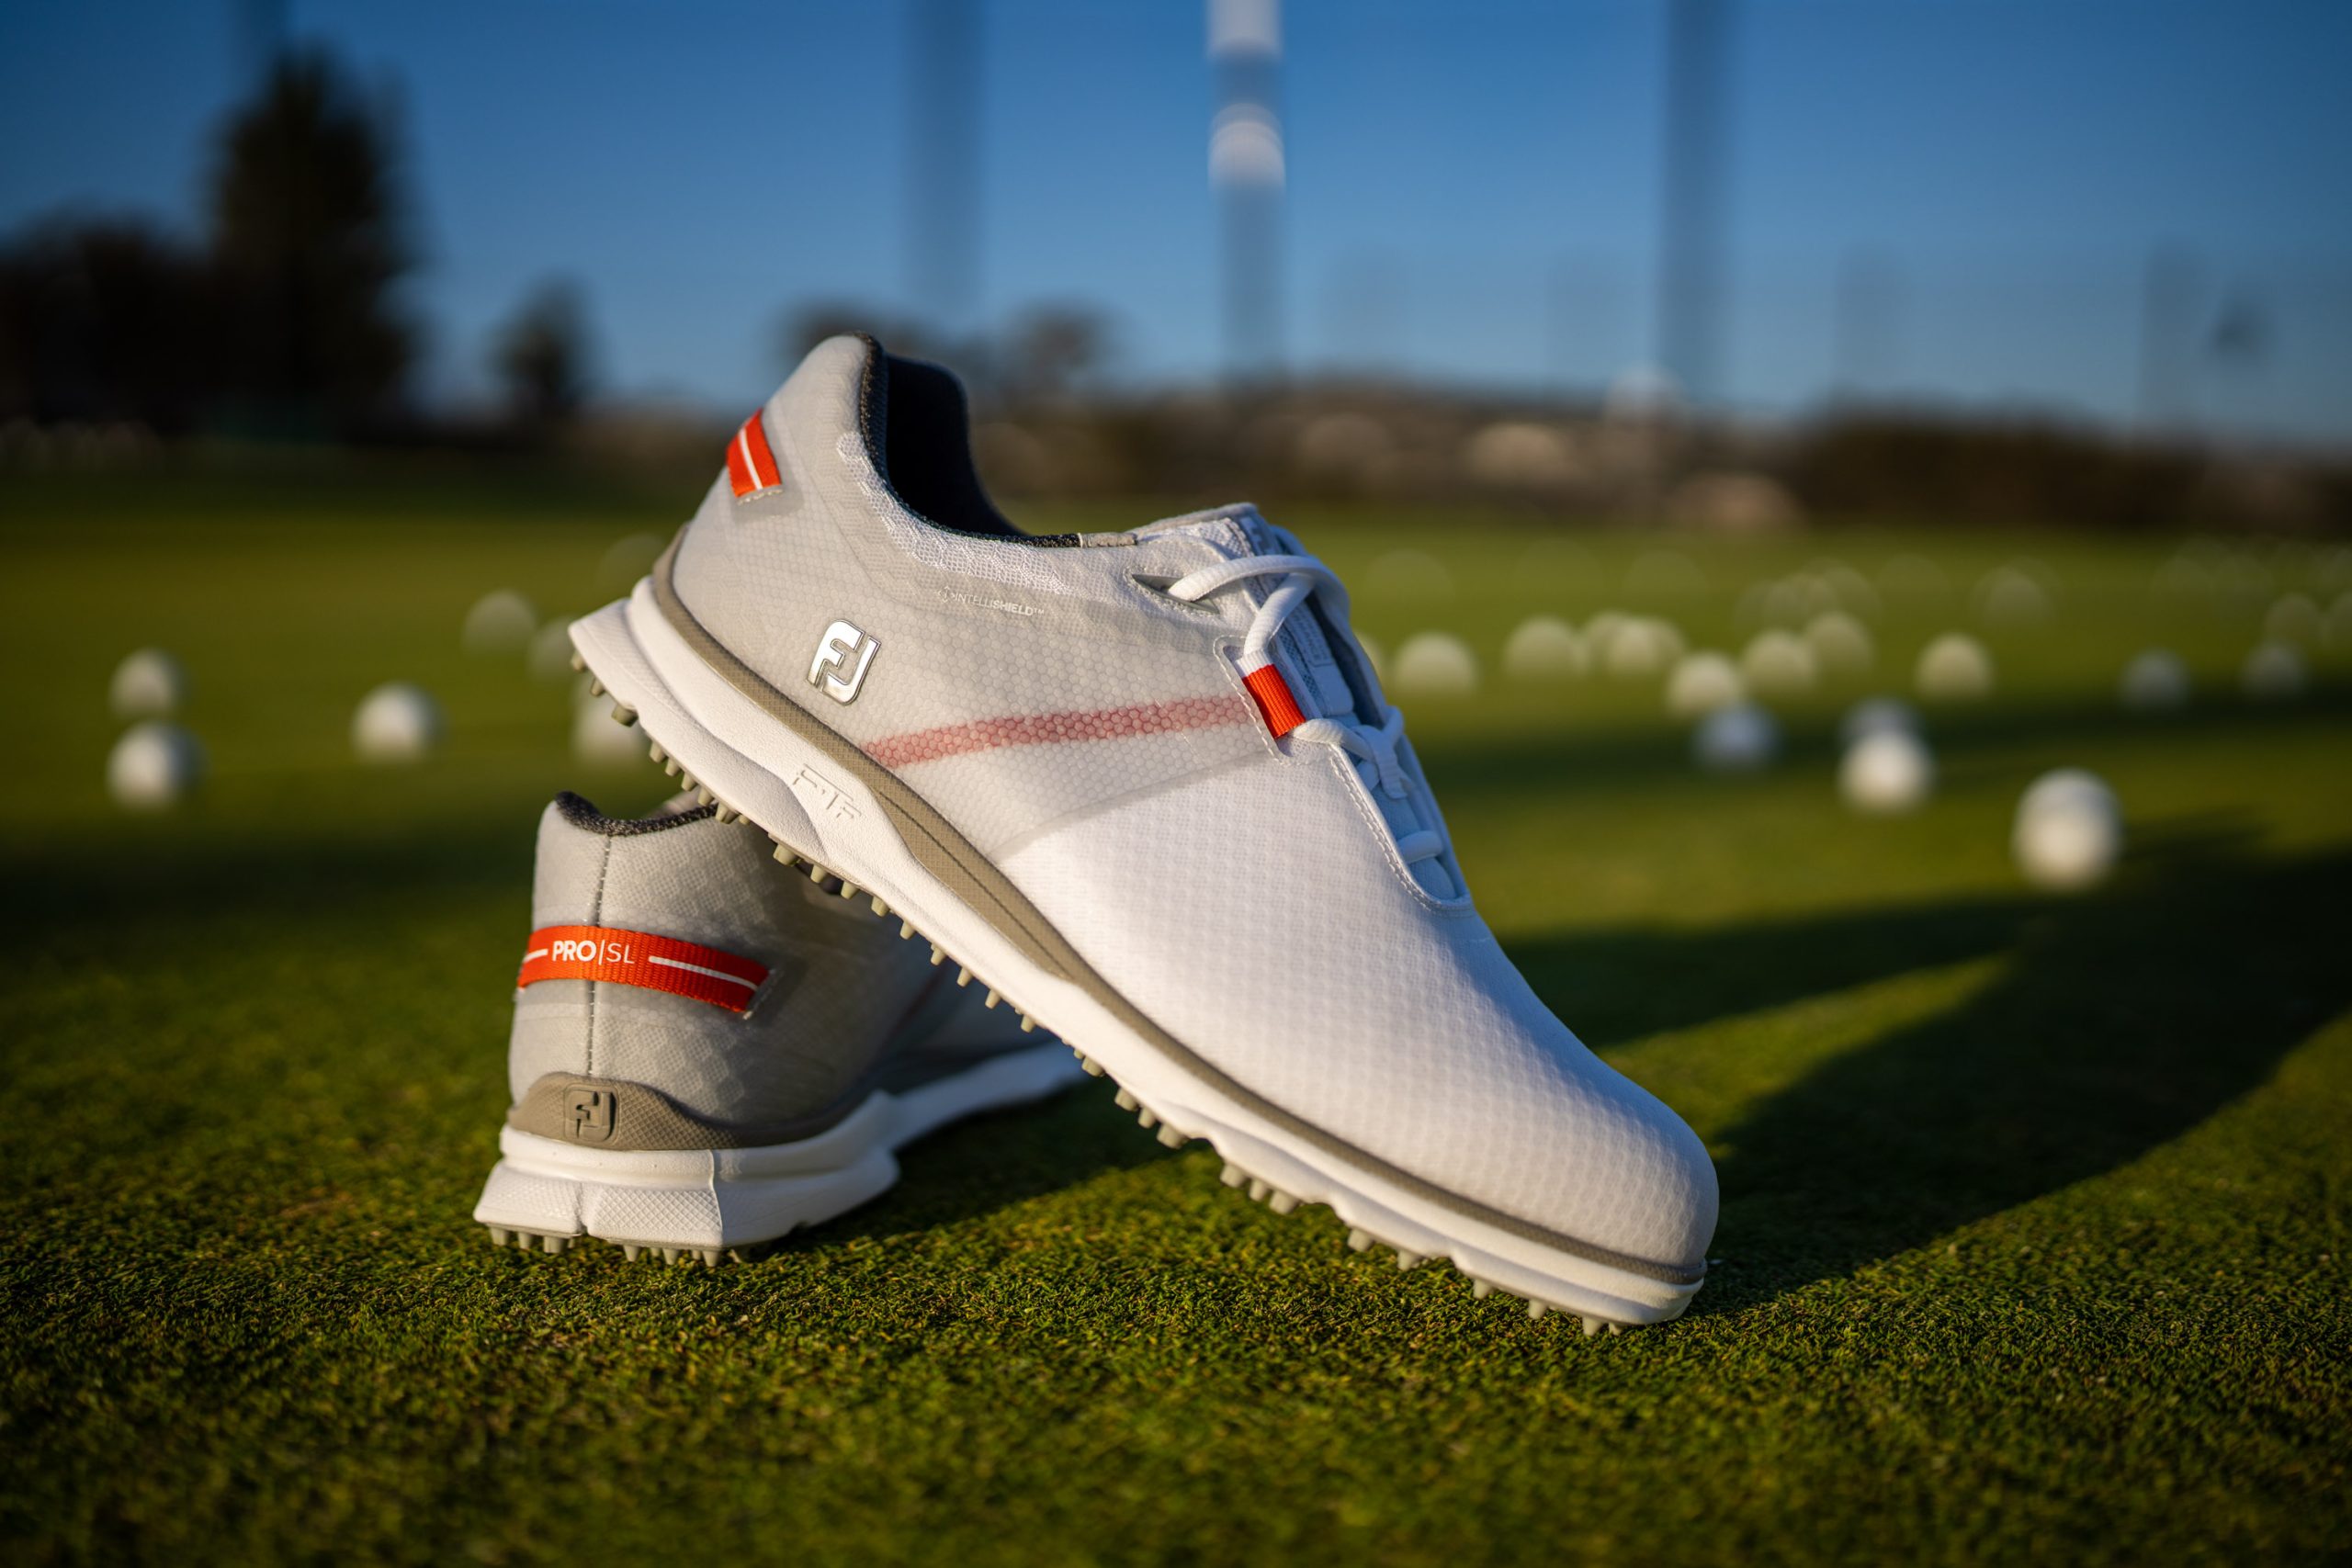 FootJoy introduces all-new ProSL Sport to the #1 Range